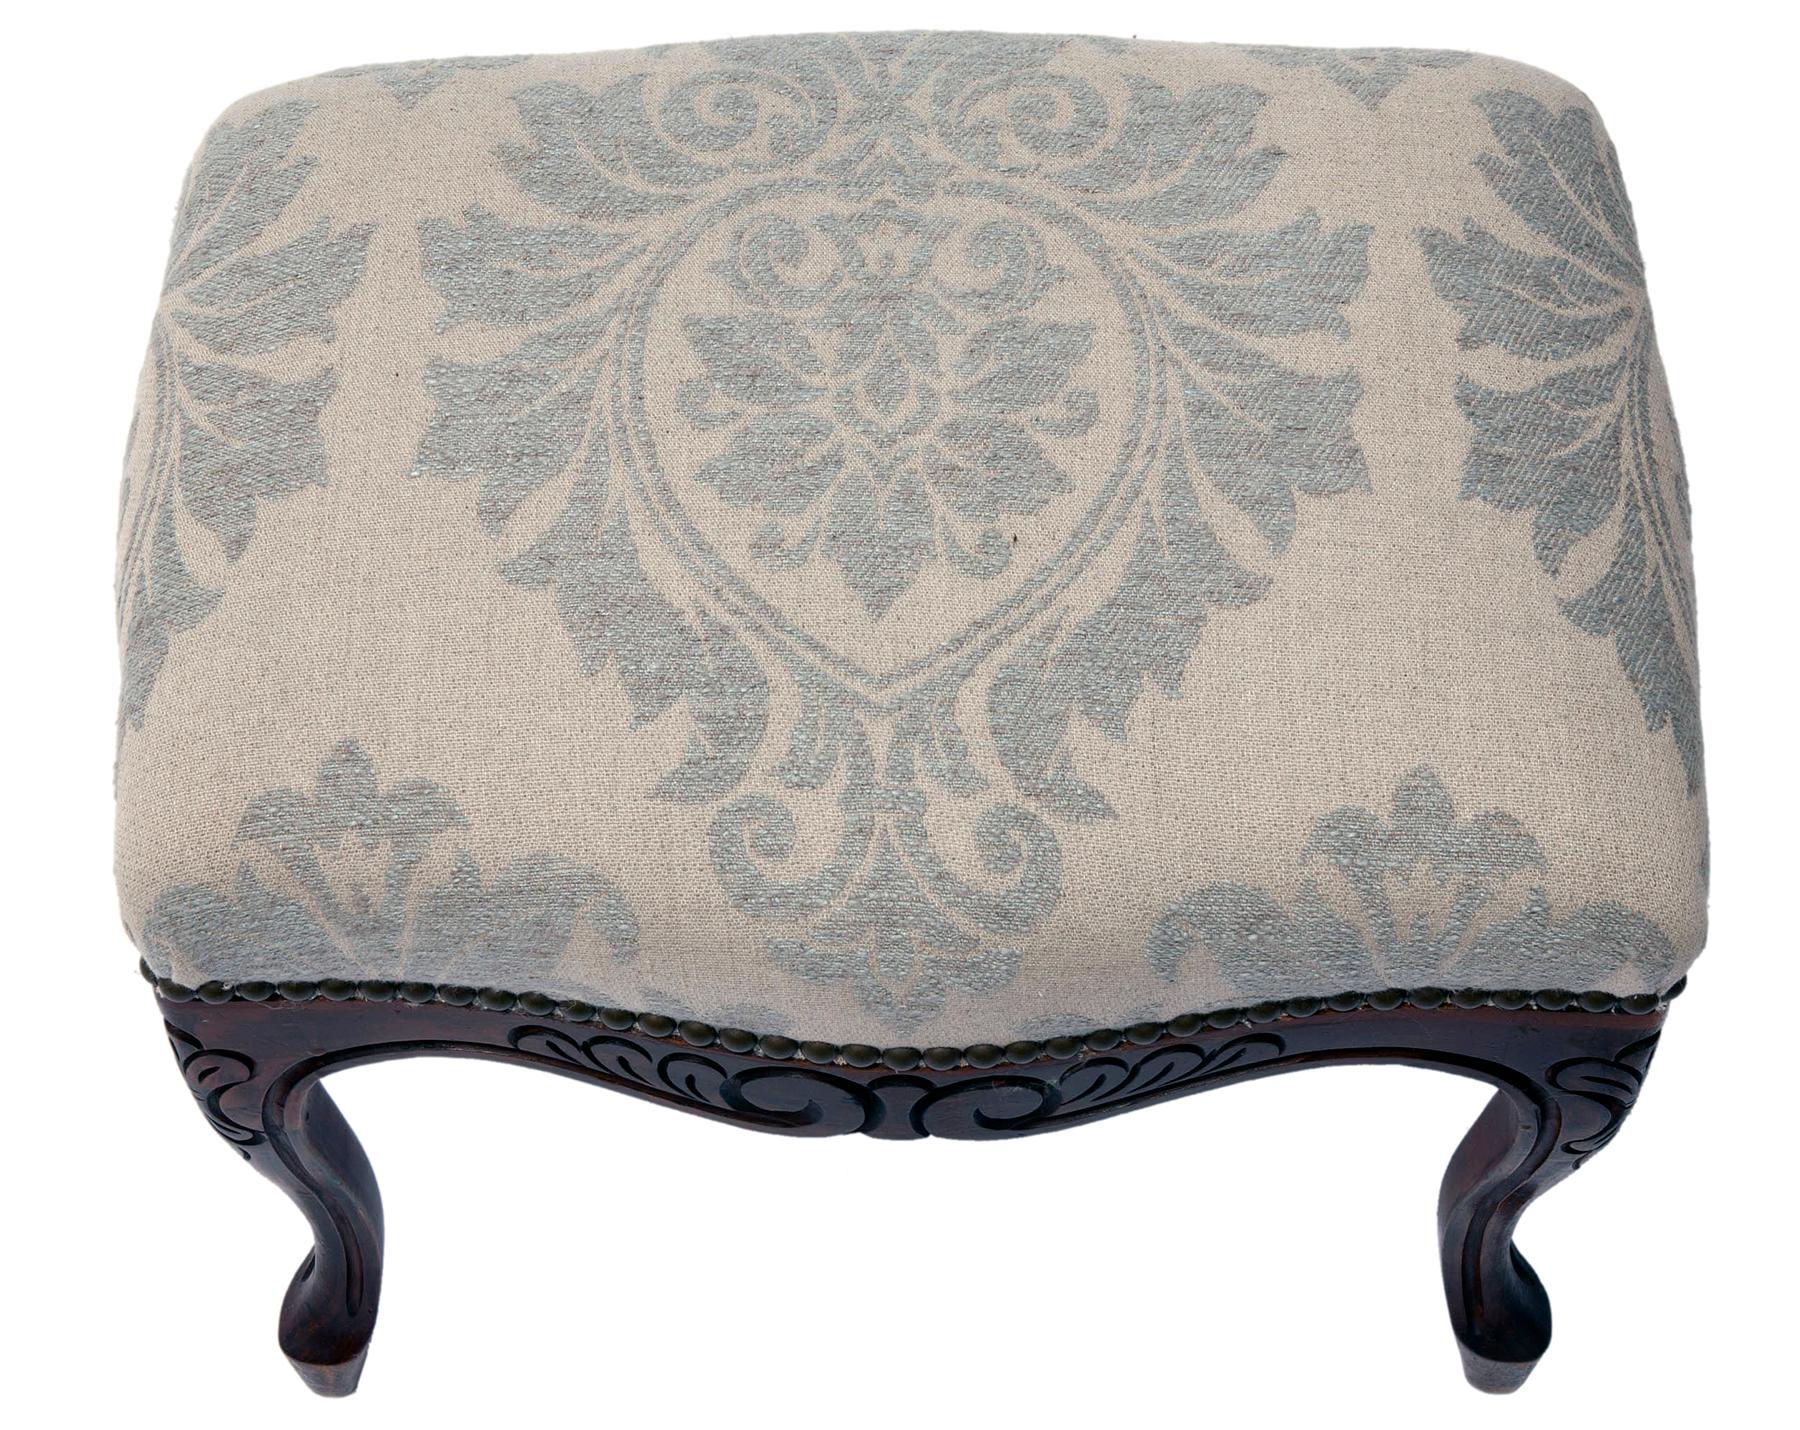 European French Provincial Footstool